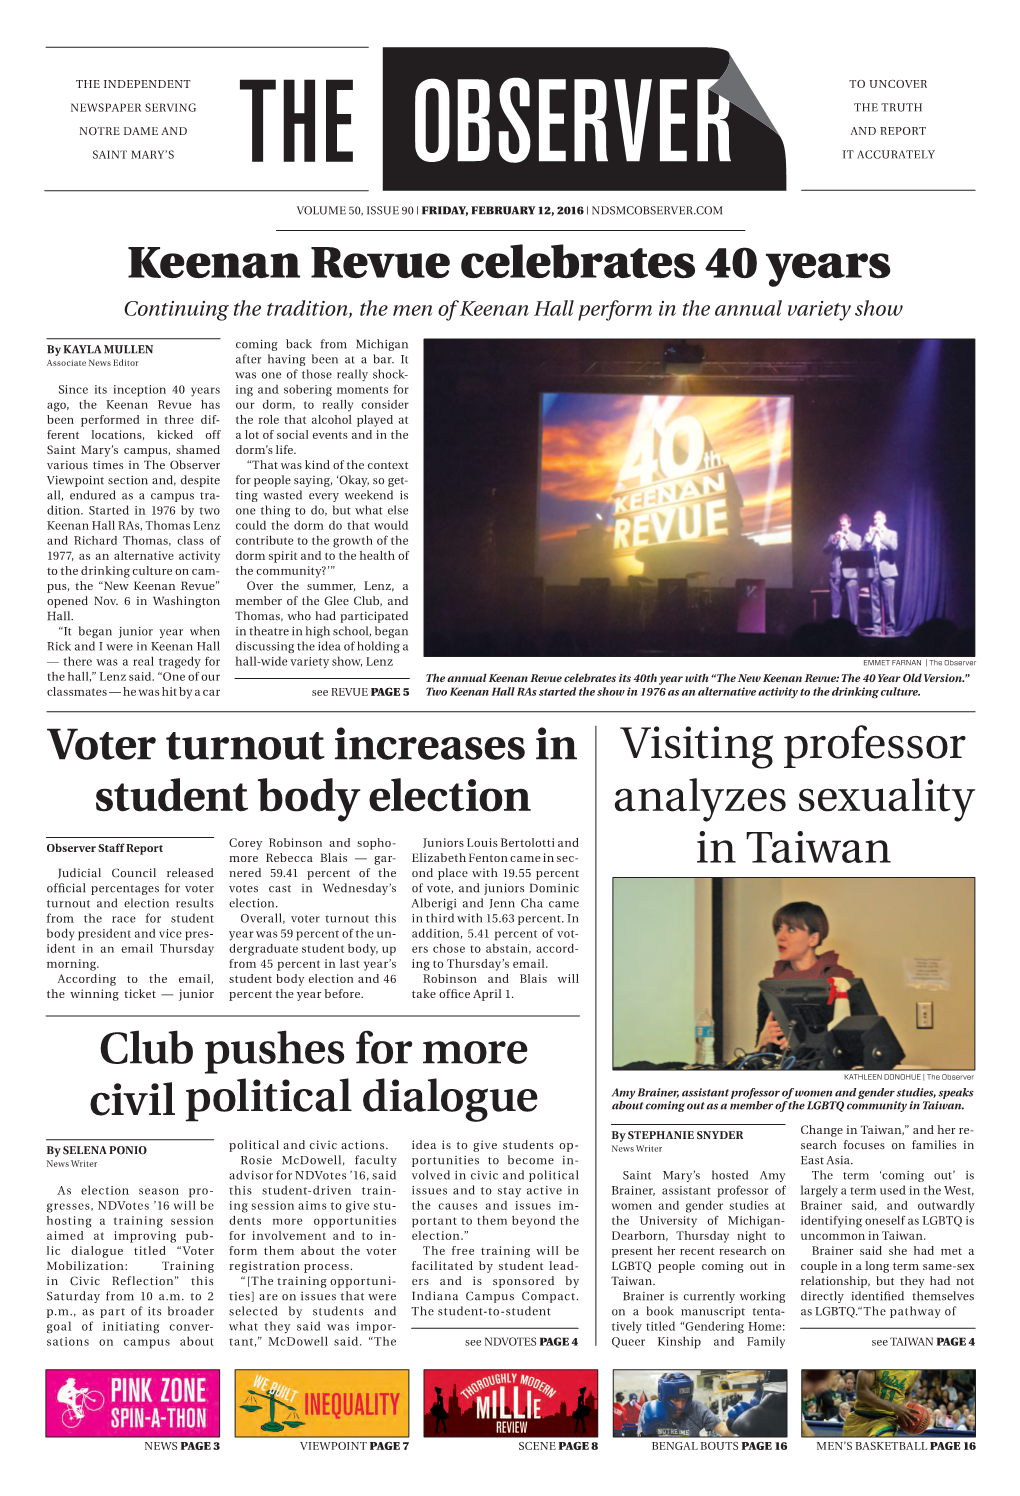 Keenan Revue Celebrates 40 Years Visiting Professor Analyzes Sexuality in Taiwan Voter Turnout Increases in Student Body Electio